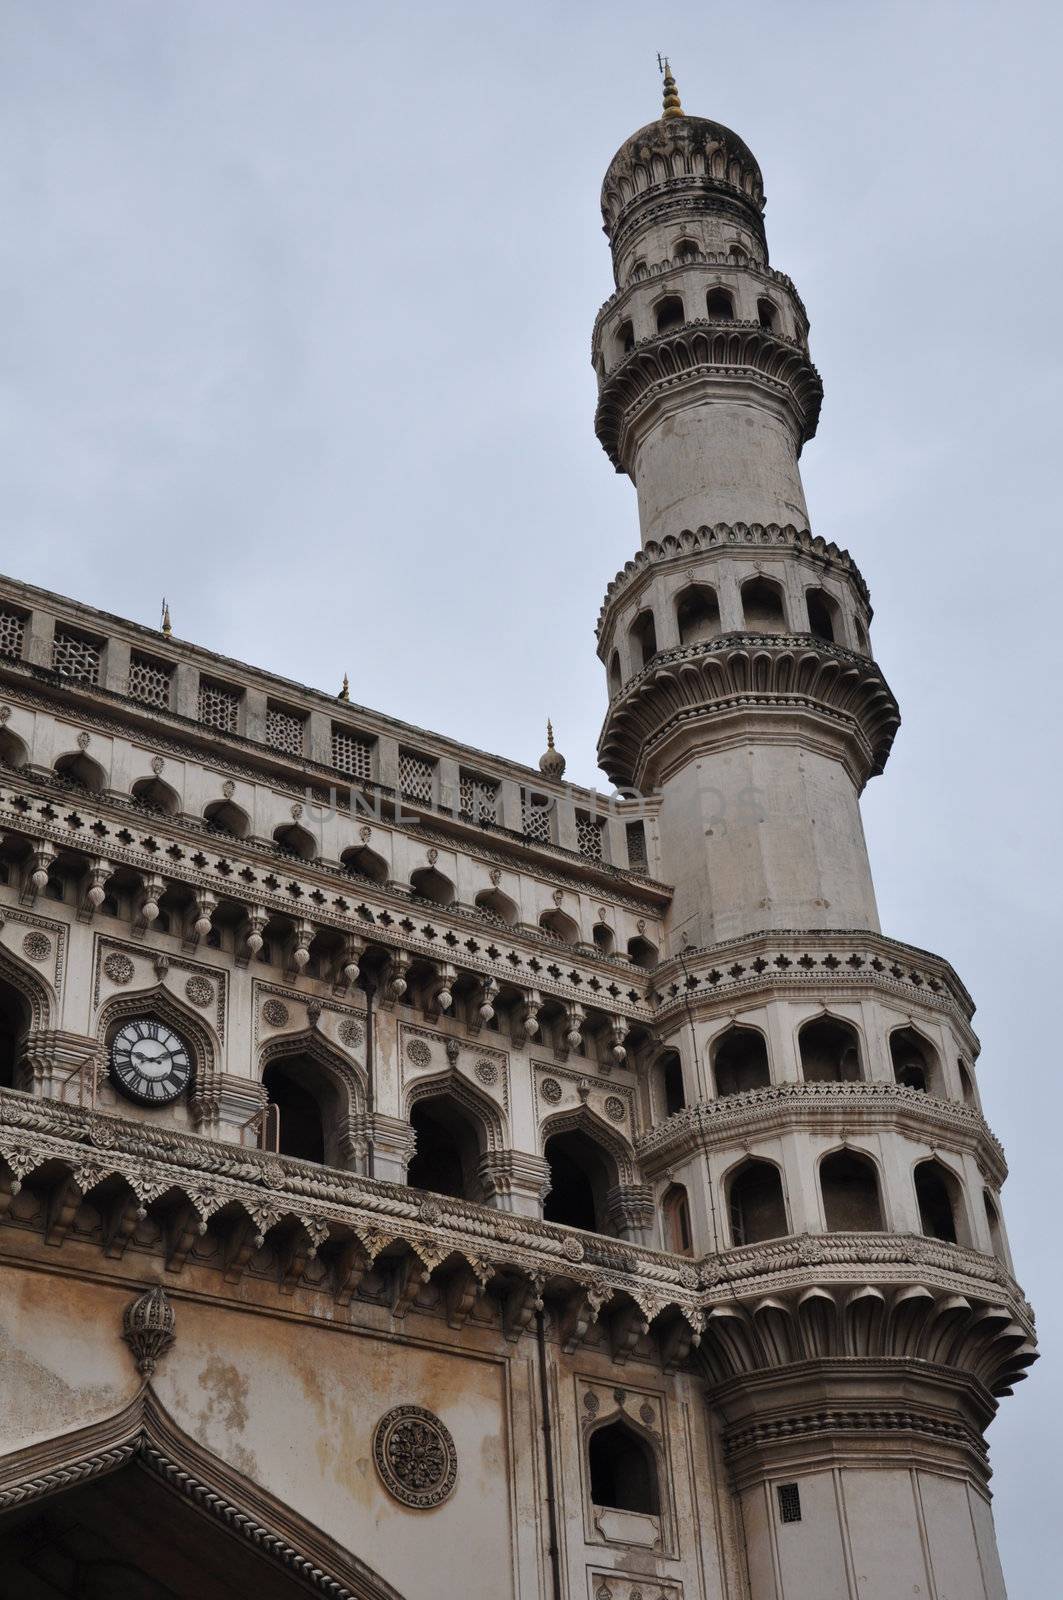 The Charminar in Hyderabad, India